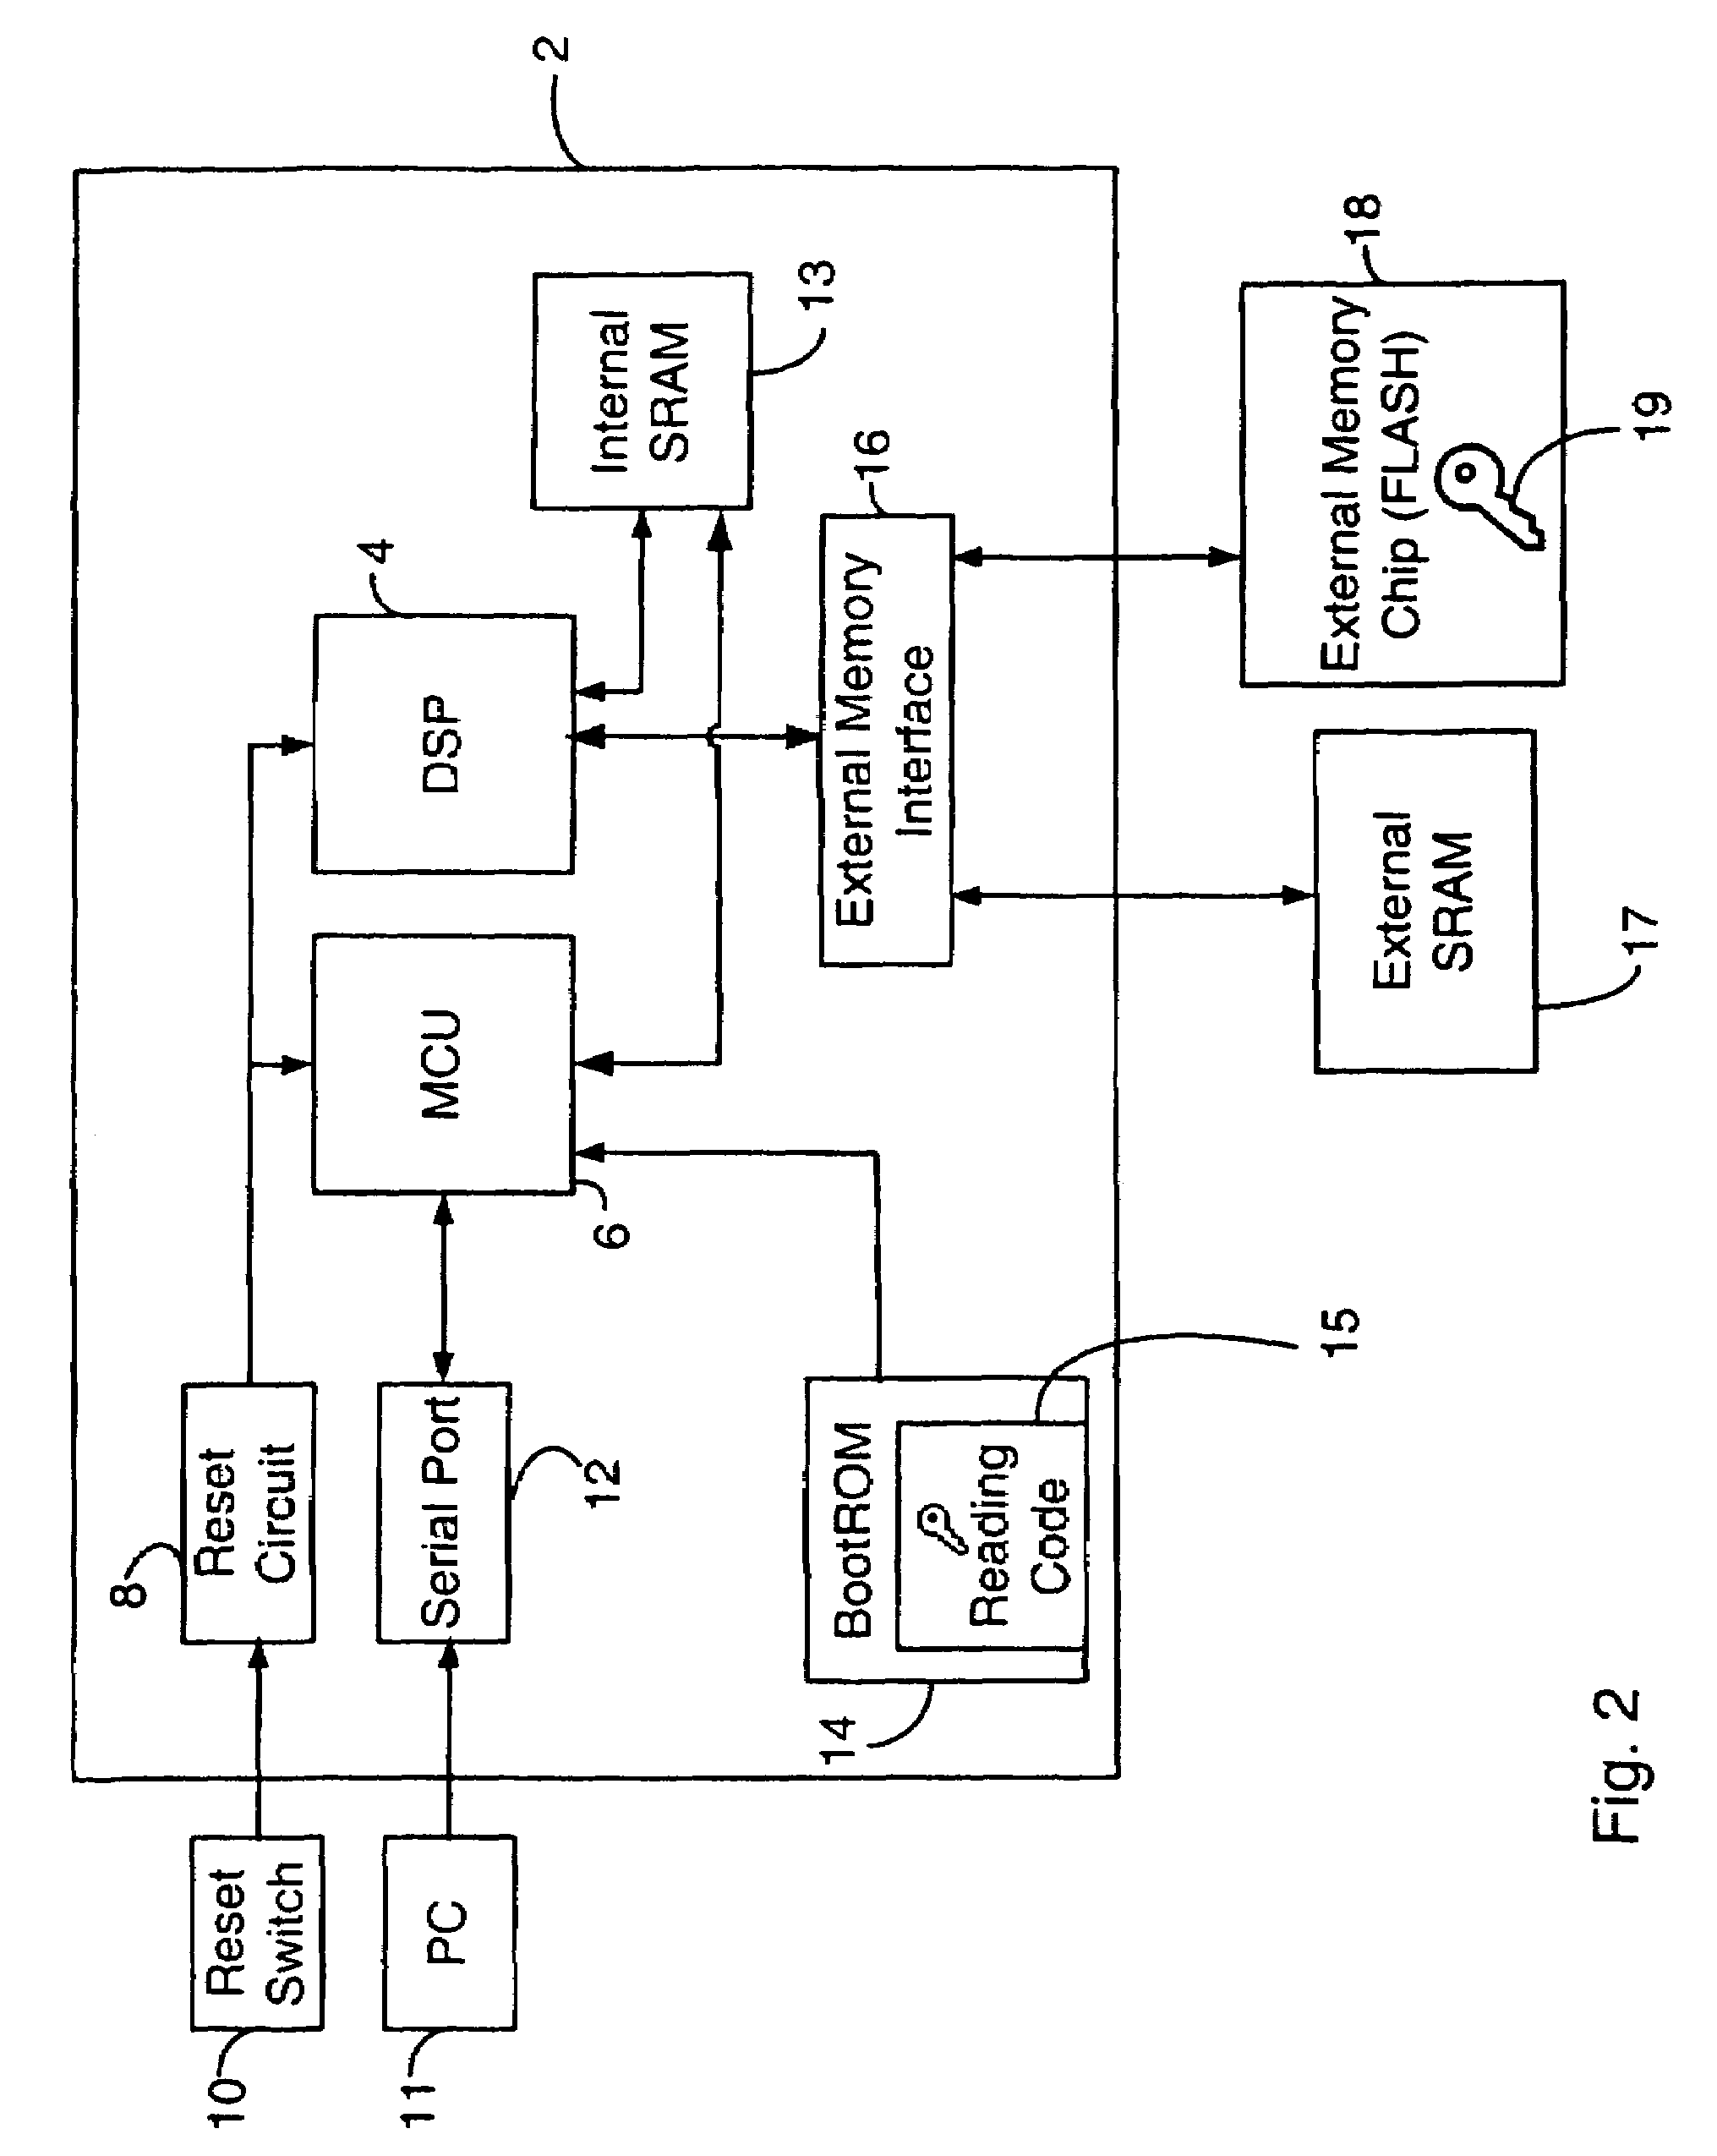 On-chip security method and apparatus